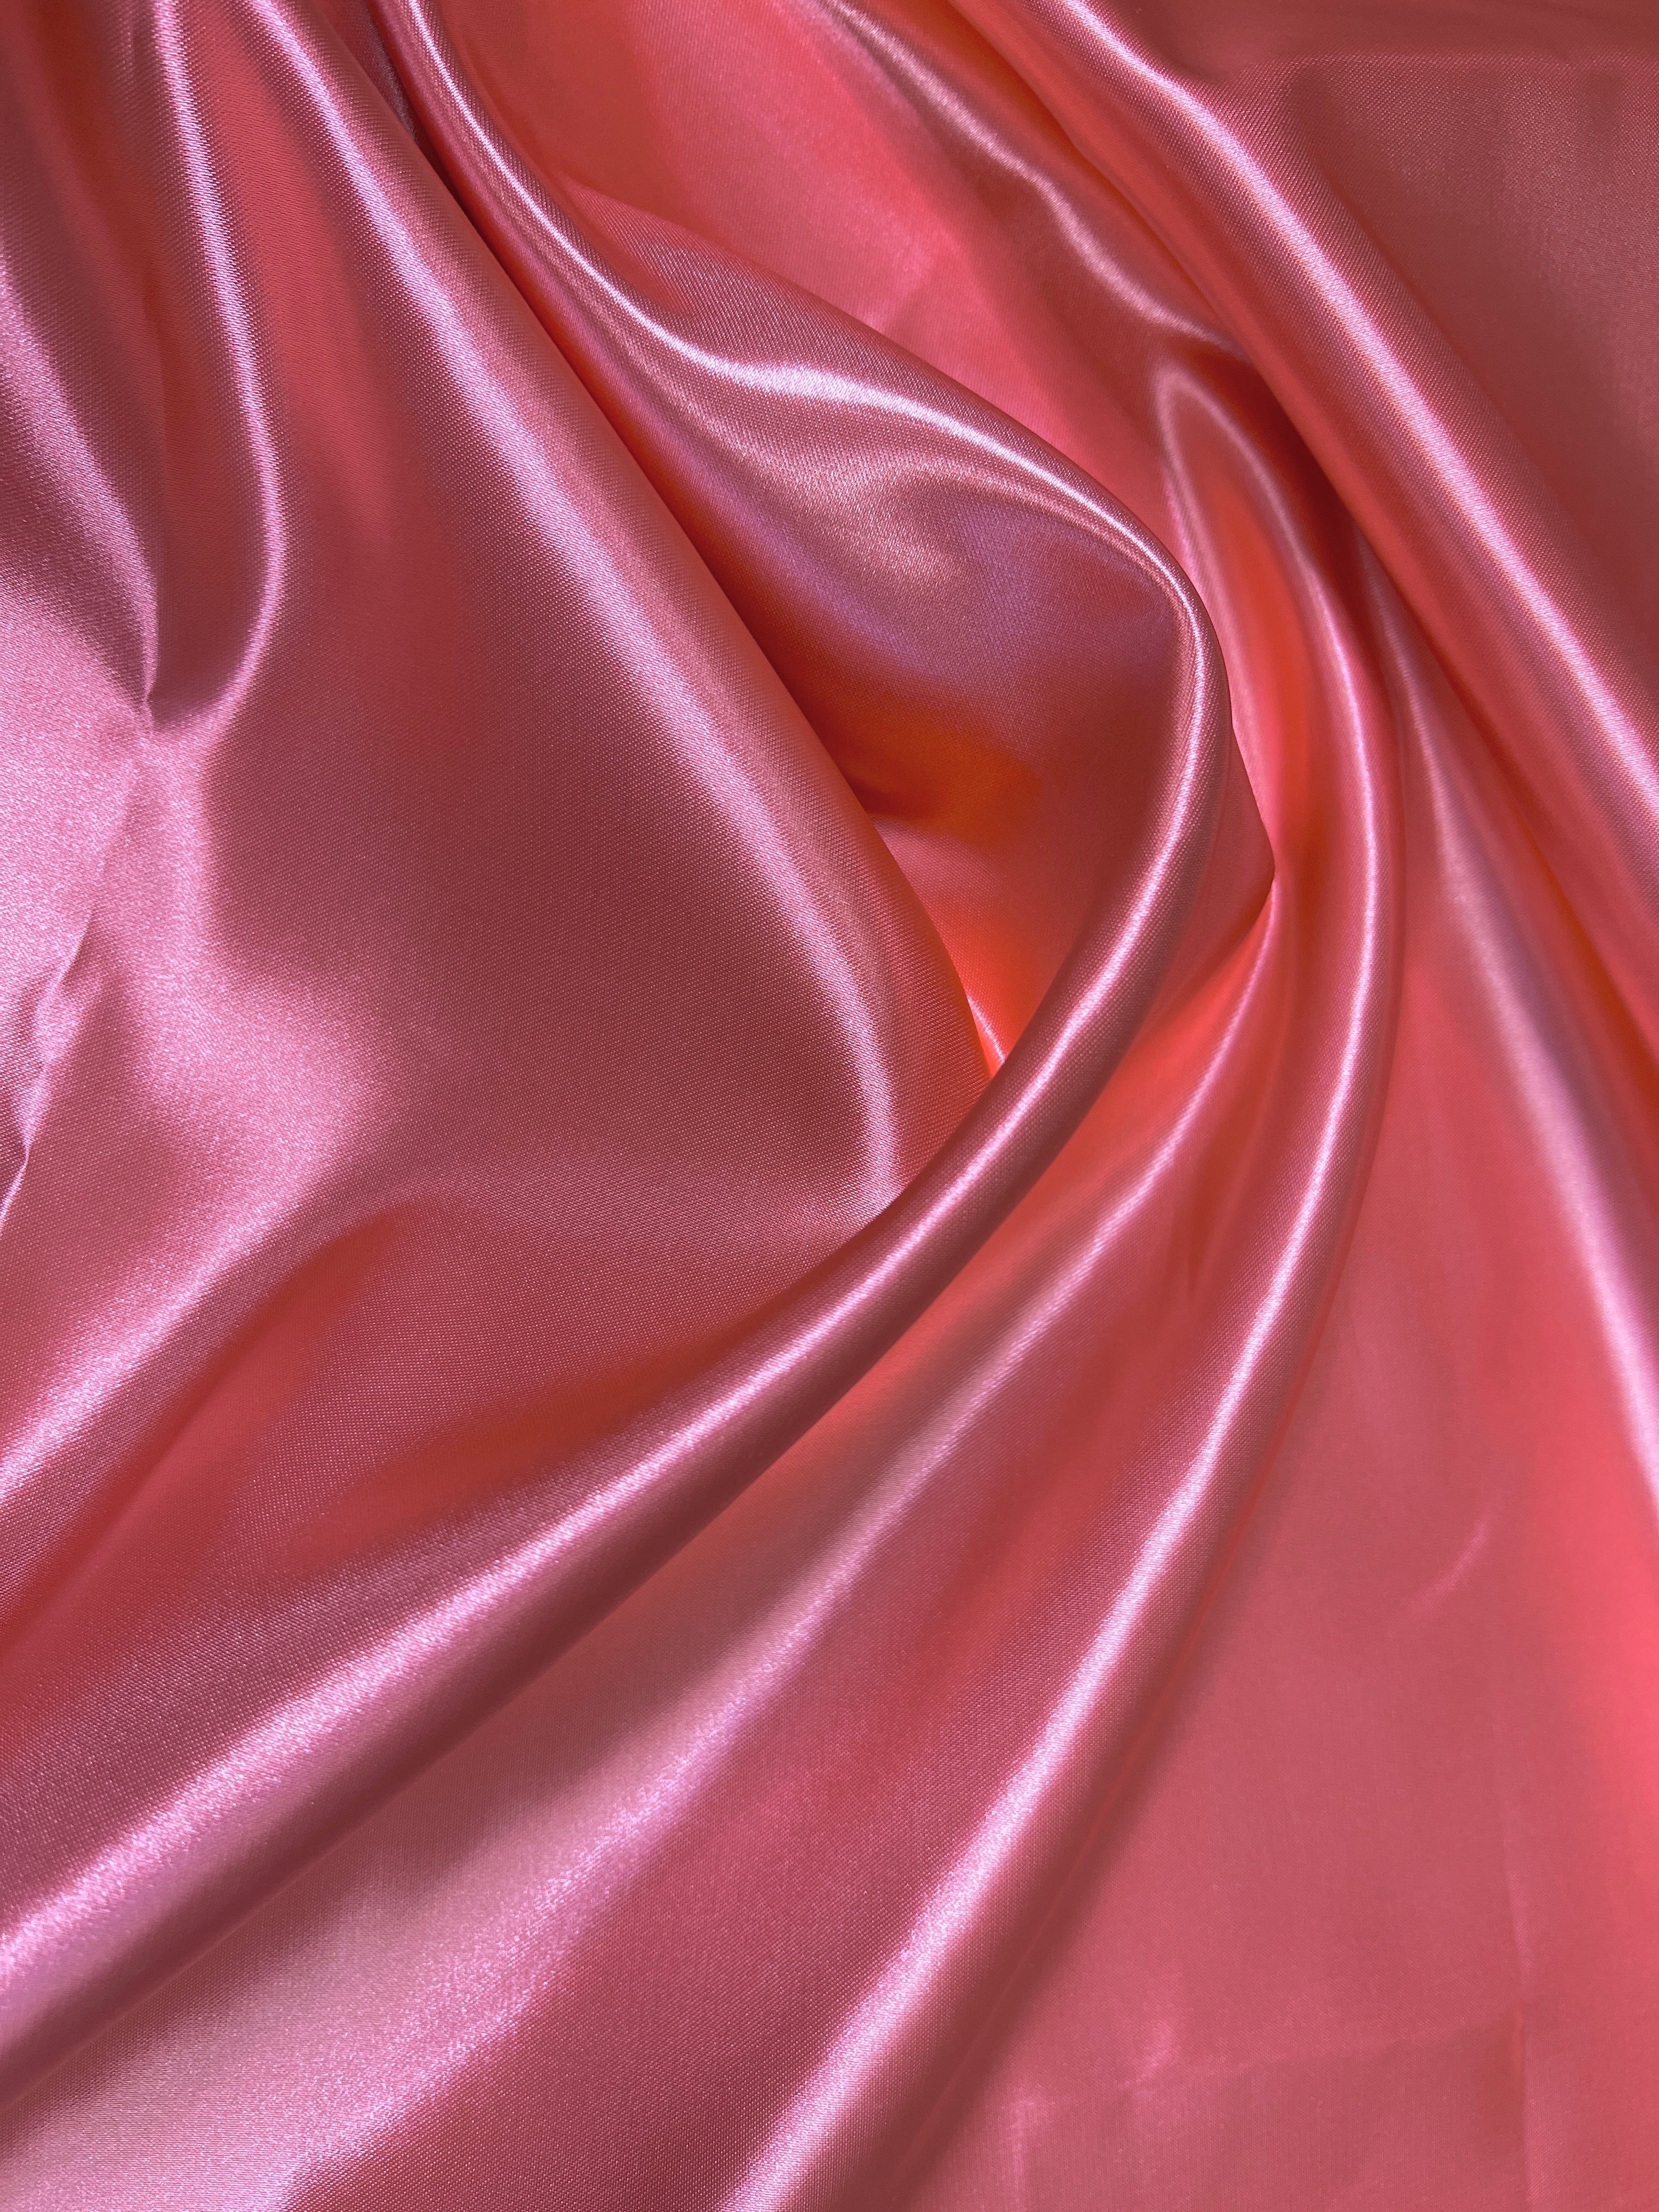 Coral Duchesse Satin Fabric, Coral Bridal Shiny Satin by yard, coral Heavy Satin Fabric for Wedding Dress, satin for woman, coral duchesse color satin, premium quality satin, best satin, cheap satin, satin usa, buy satin online, luxury satin, pink duchesse satin, hot pink color fabric, liliac pink color fabric for dress, light pink color fabric,